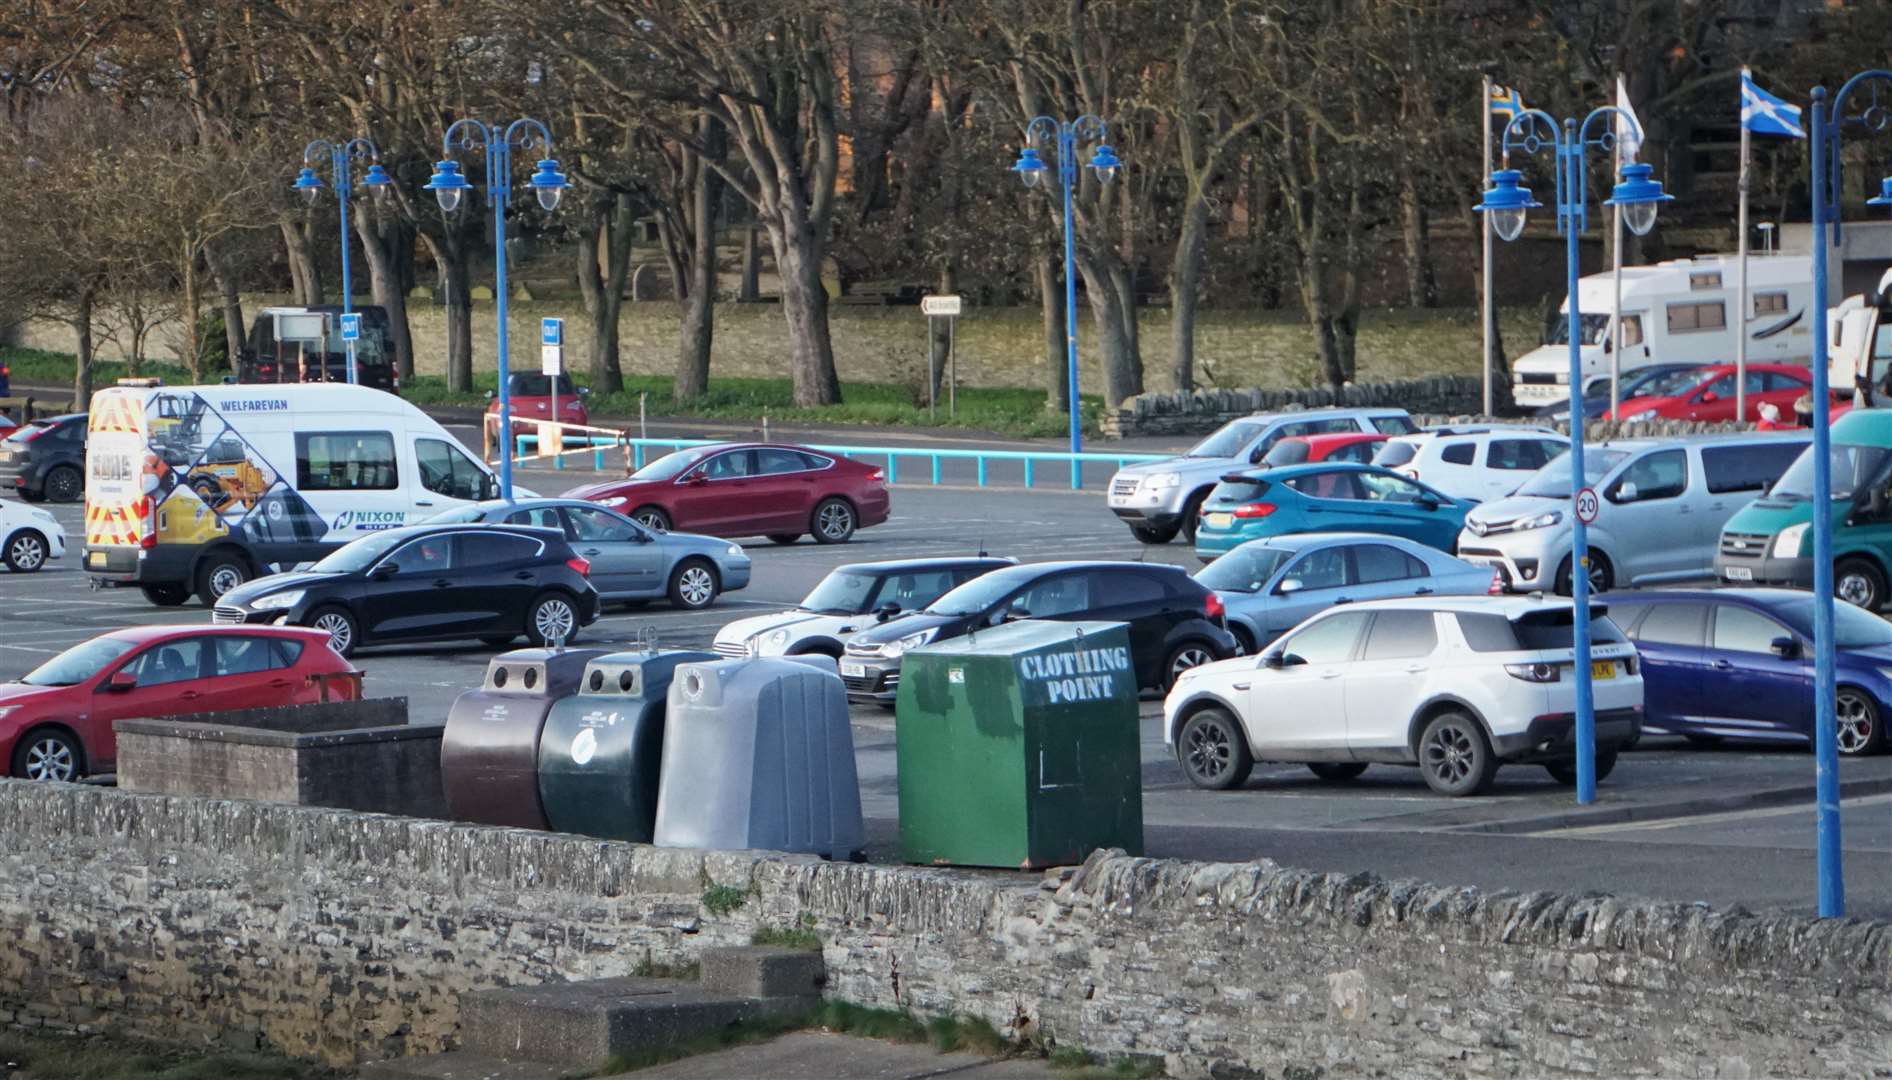 The riverside car park in Wick is part of the trial. Picture: DGS